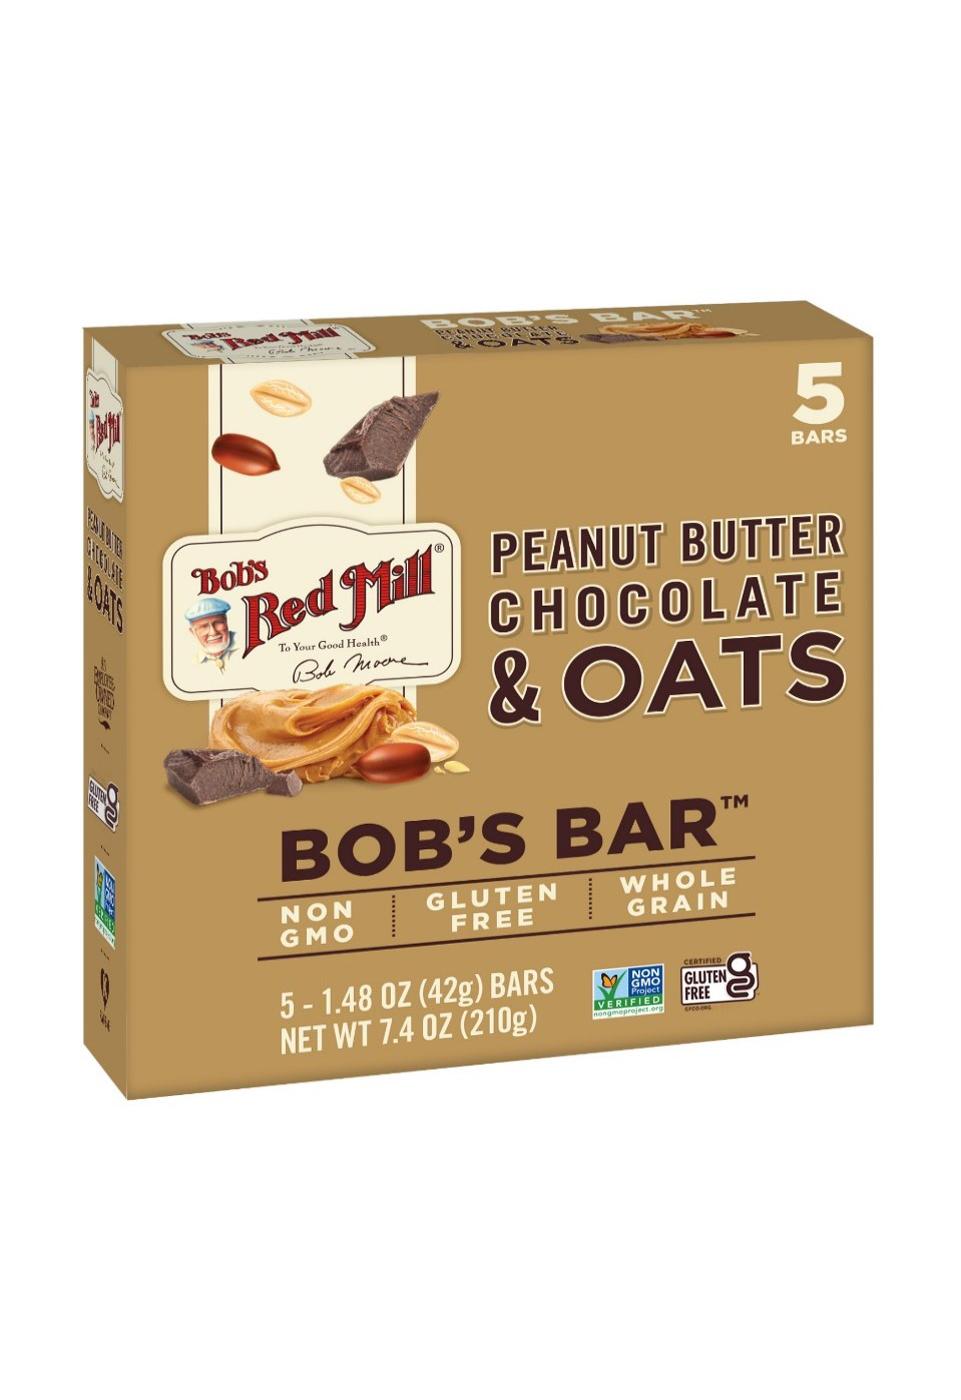 Bob's Red Mill Peanut Butter Chocolate & Oats Bob's Bars; image 1 of 2